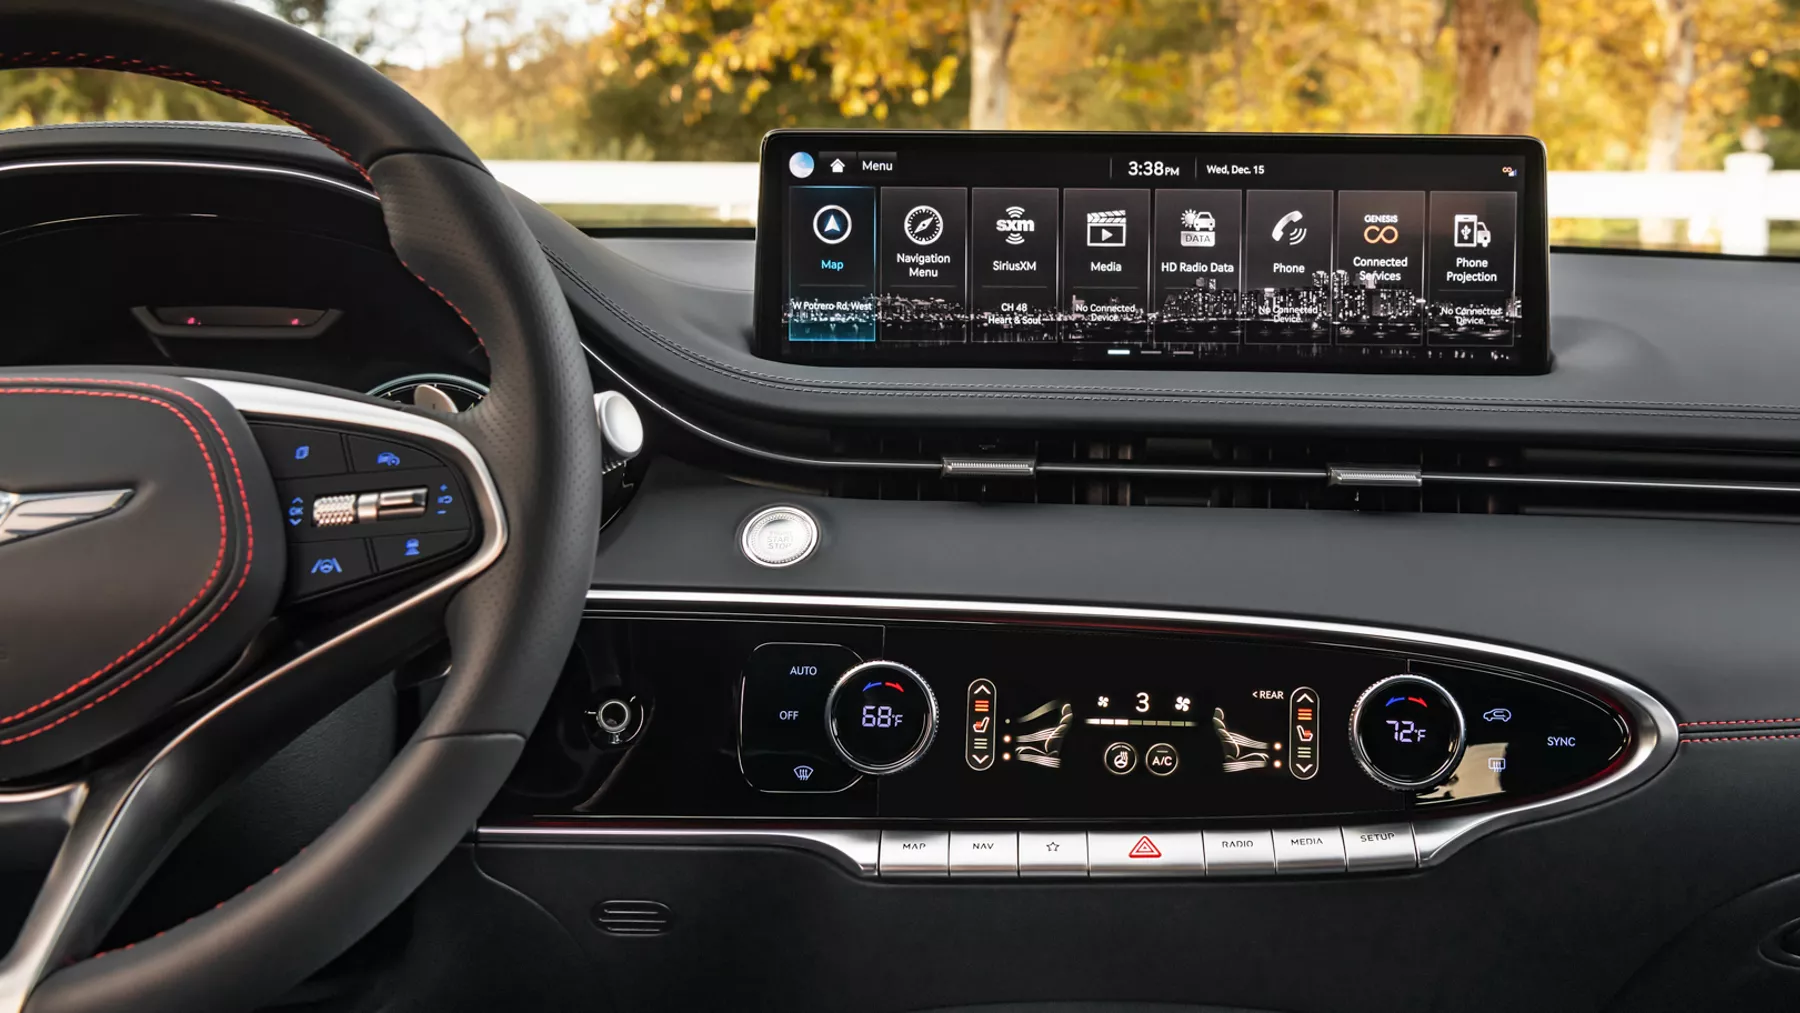 GV70 infotainment display and air conditioning and heating controls.